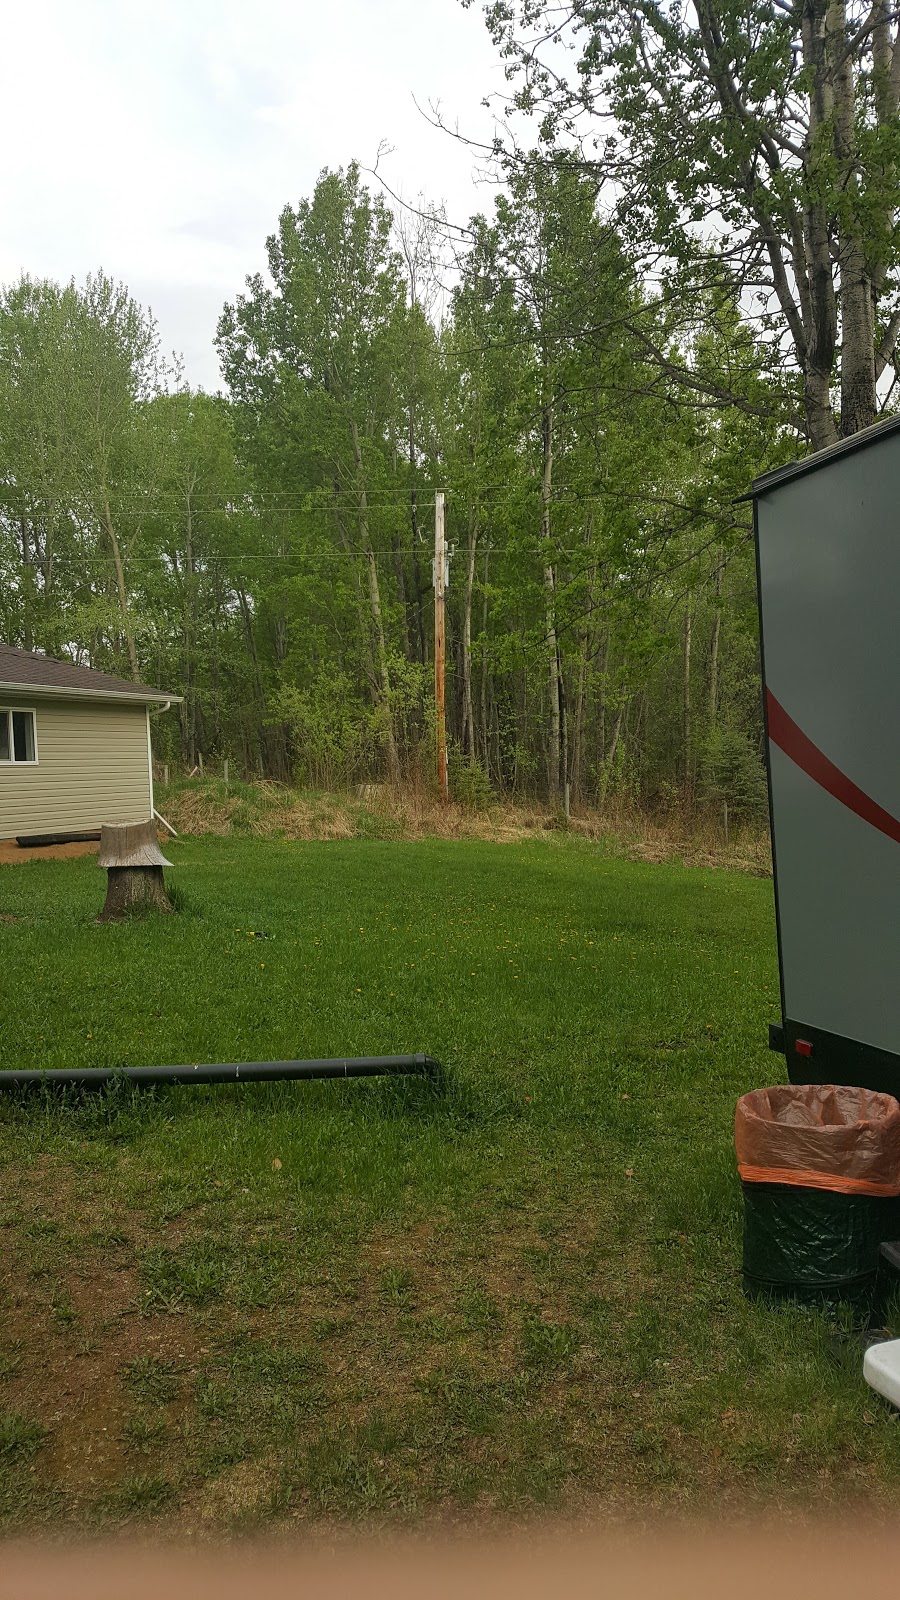 South Baptiste Cabins RV Camping & Storage Ltd | campground | 69 Baptiste Dr, South Baptiste, AB T9S 1R7, Canada | 7806757777 OR +1 780-675-7777